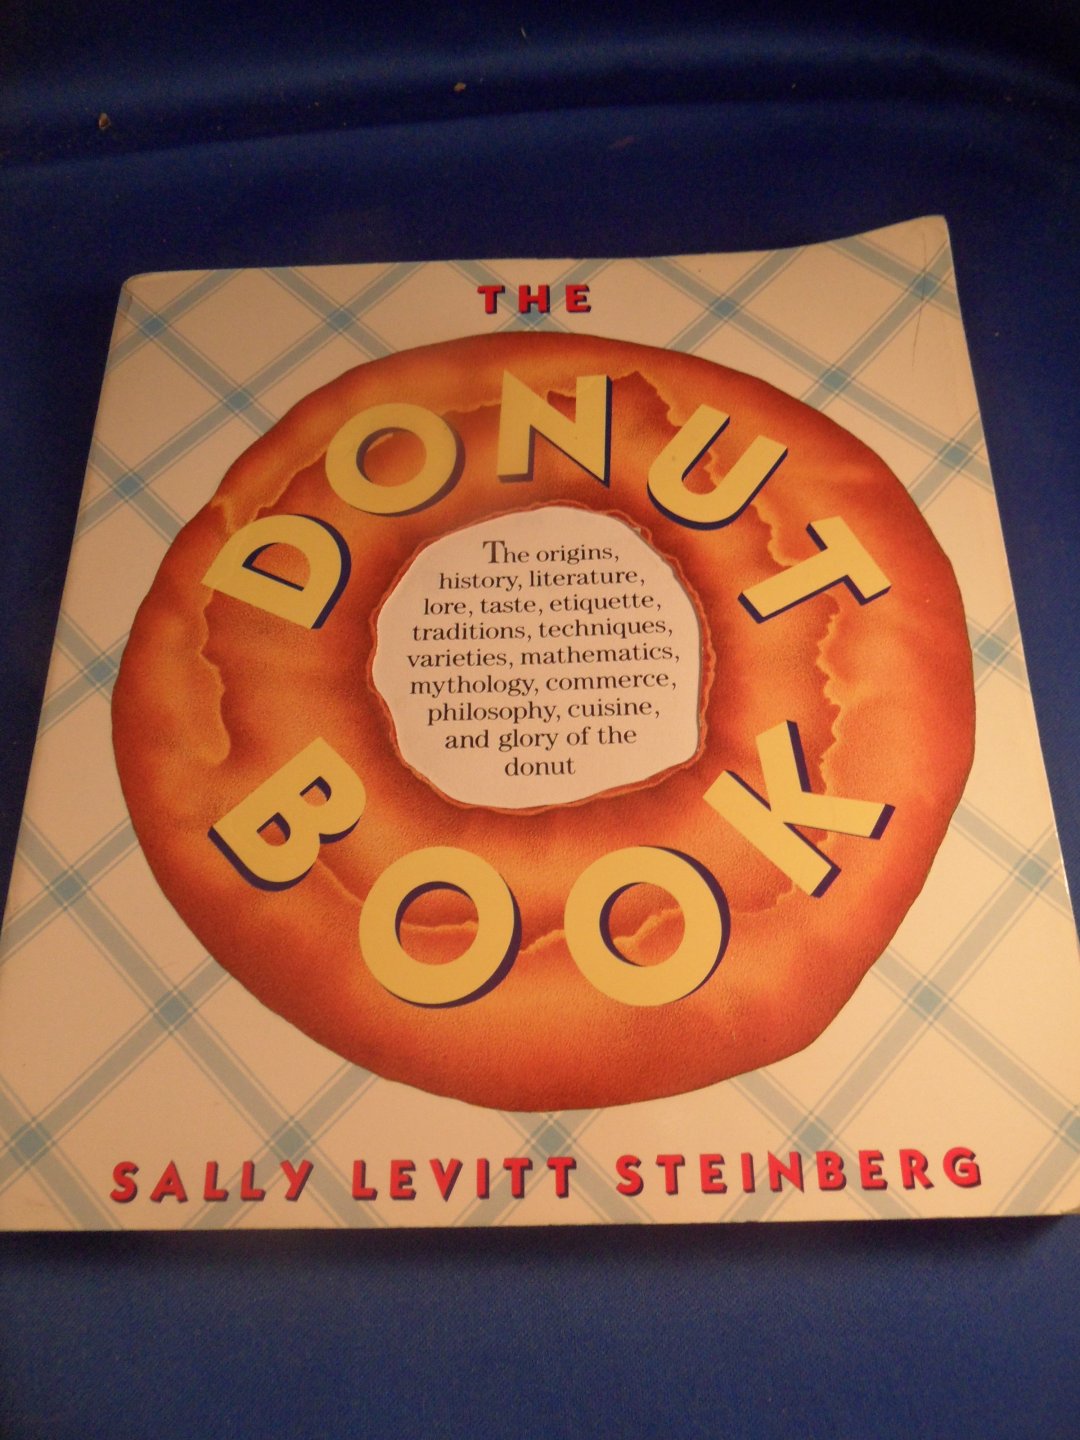 Steinberg, Sally Levitt - The Donut Book. The origins, history, literature, taste, etiquette, traditions, techniques, varieteis mathematics, mythology, commerce, philosophy, cuisine, and glory of the donut